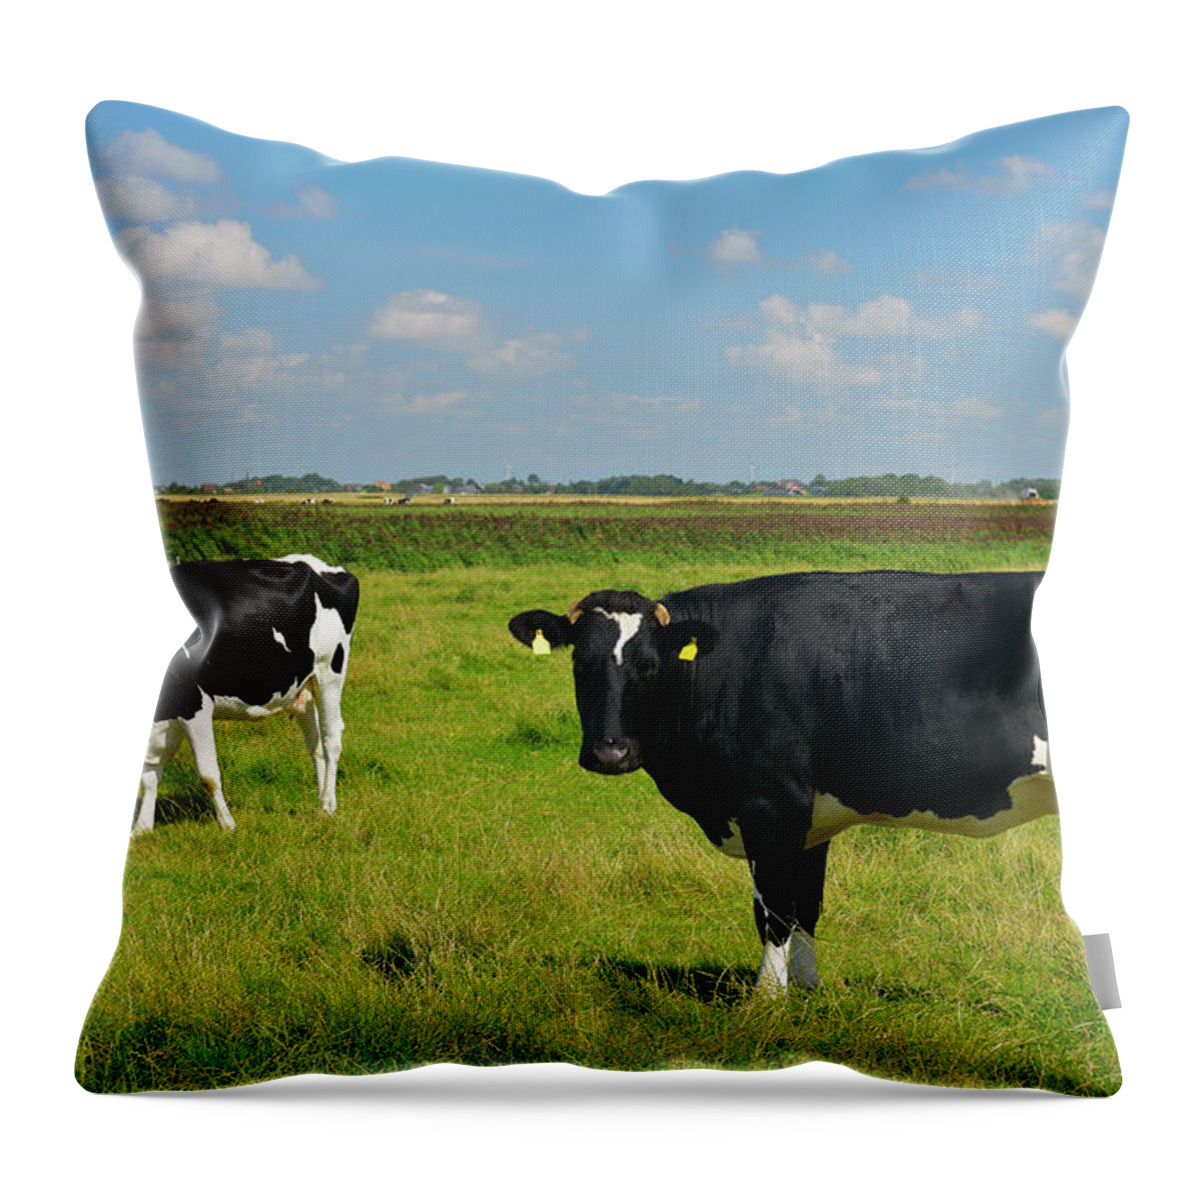 Grass Throw Pillow featuring the photograph Cows On Meadow by Raimund Linke